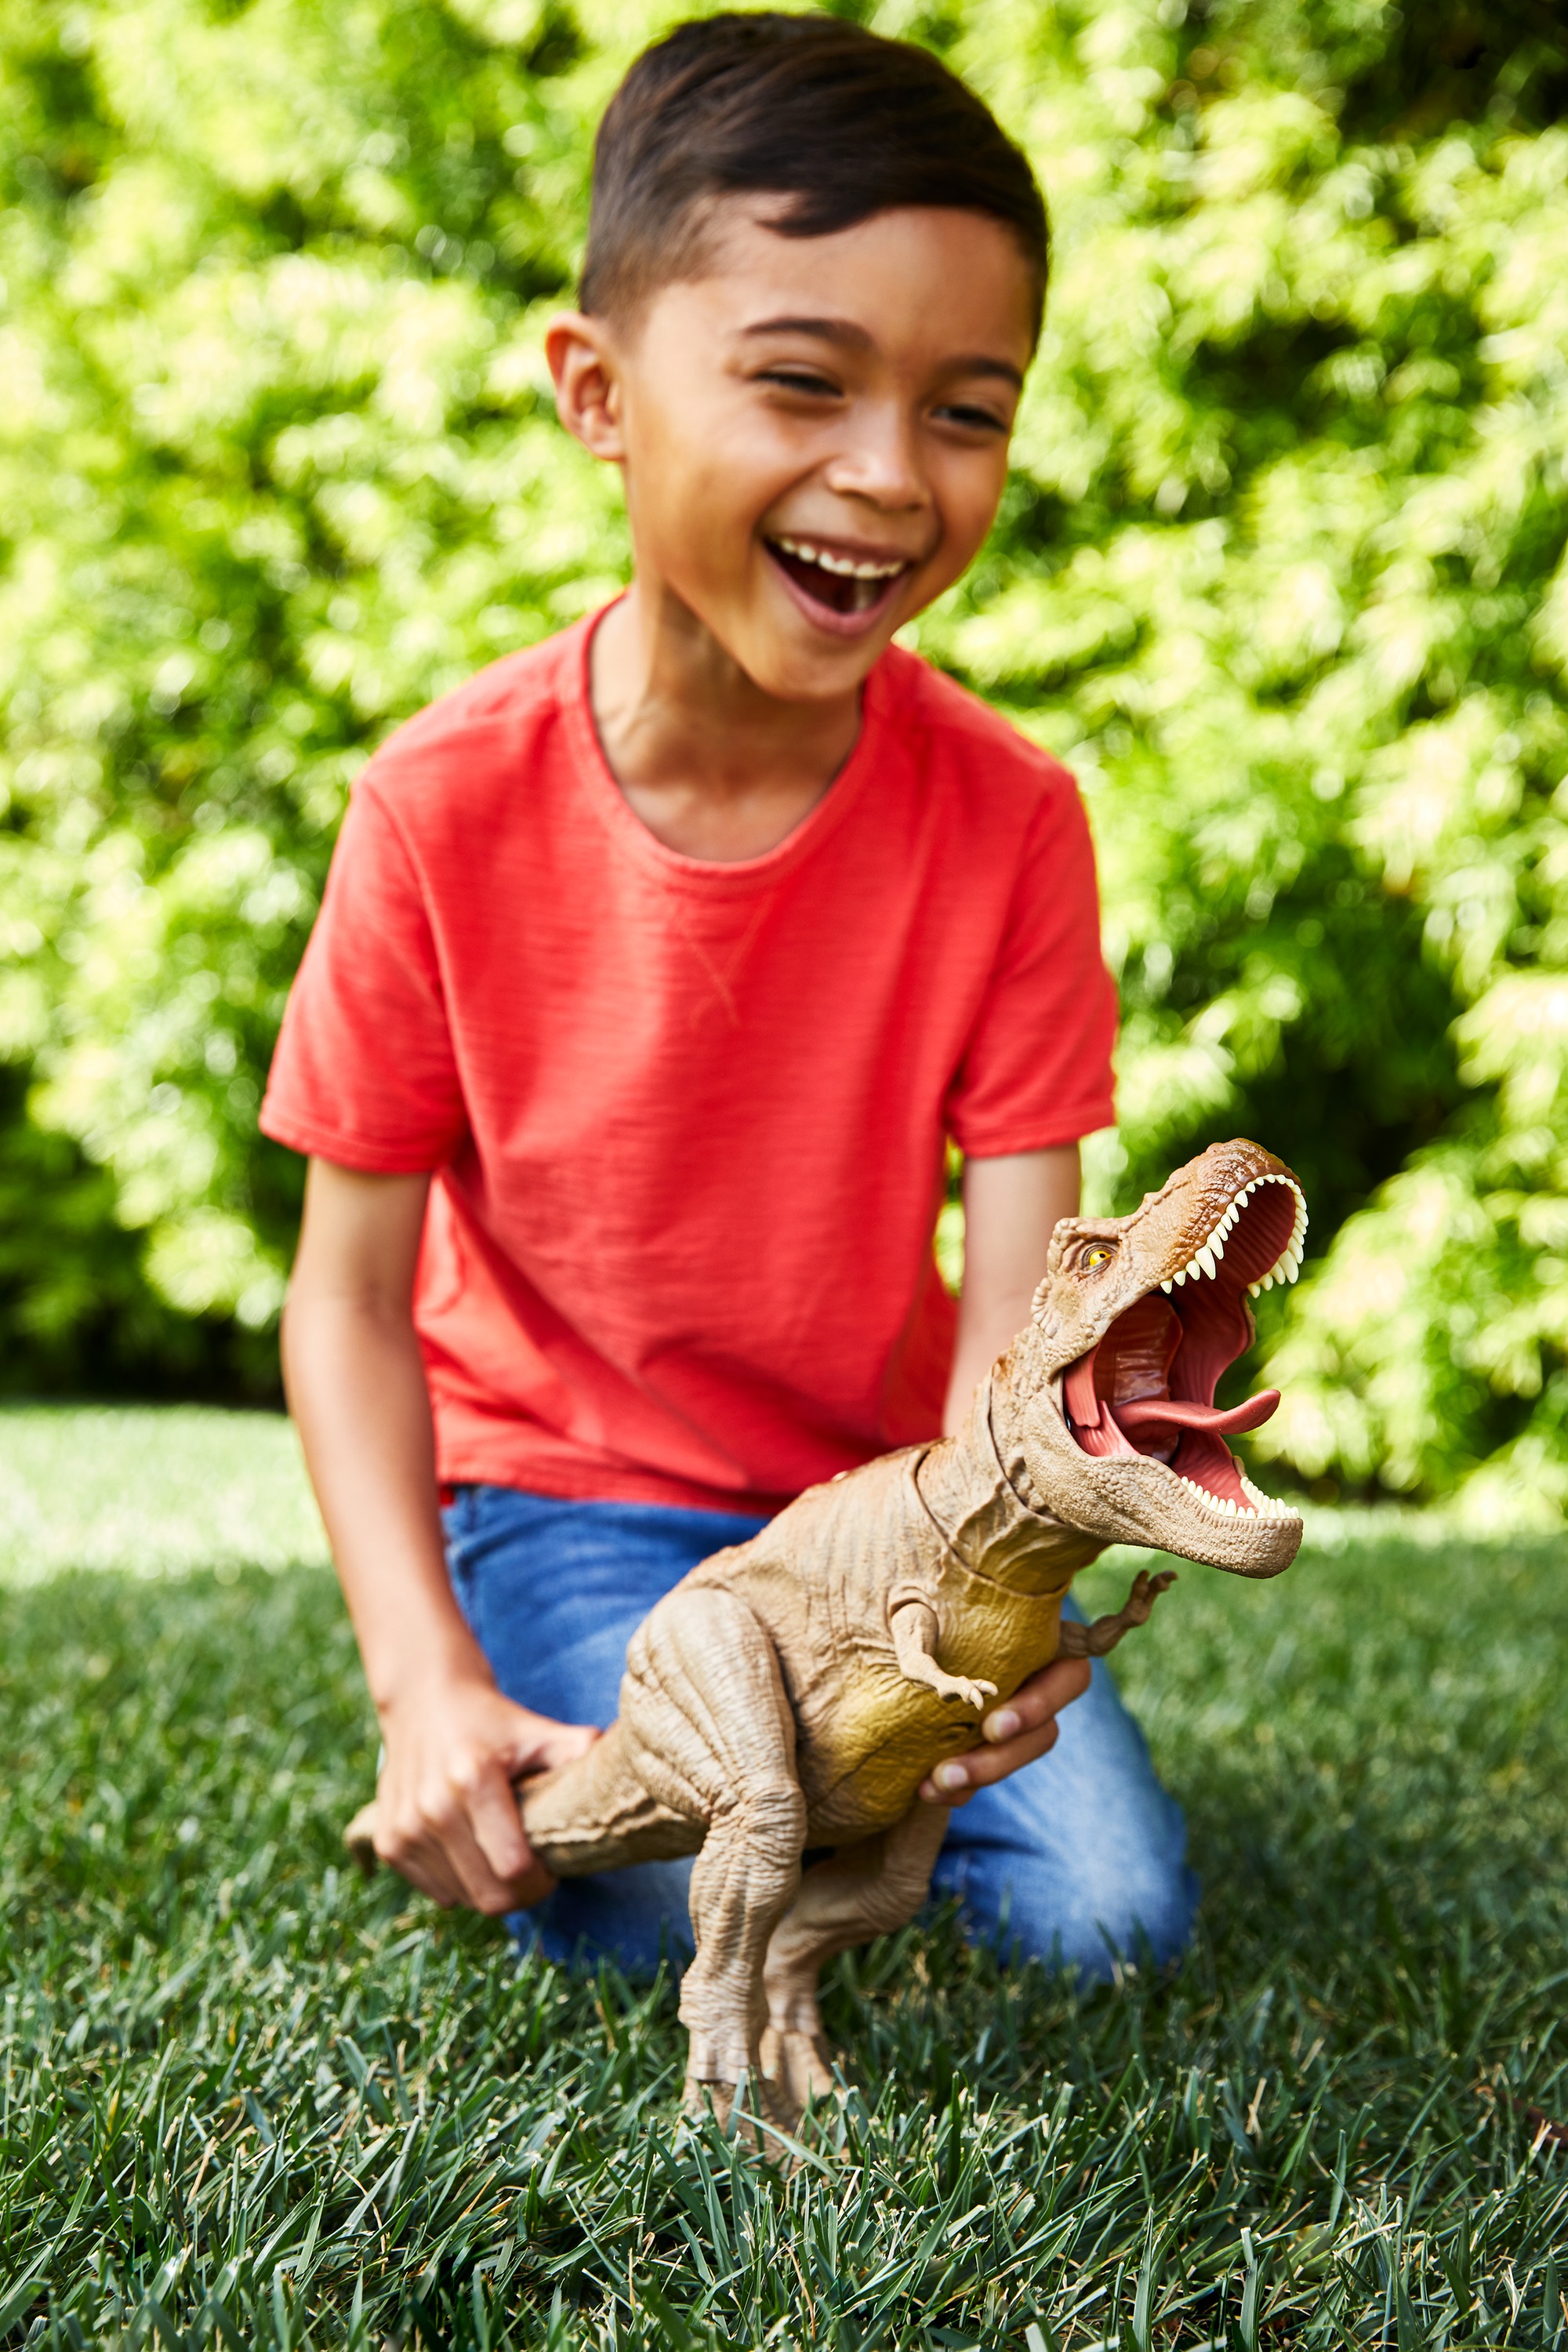 Jurassic World Camp Cretaceous Epic Roarin��� Tyrannosaurus Rex Large Action Figure, Primal Attack Feature, Sound, Realistic Shaking, Movable Joints; Ages 4 Years & Up - image 4 of 8